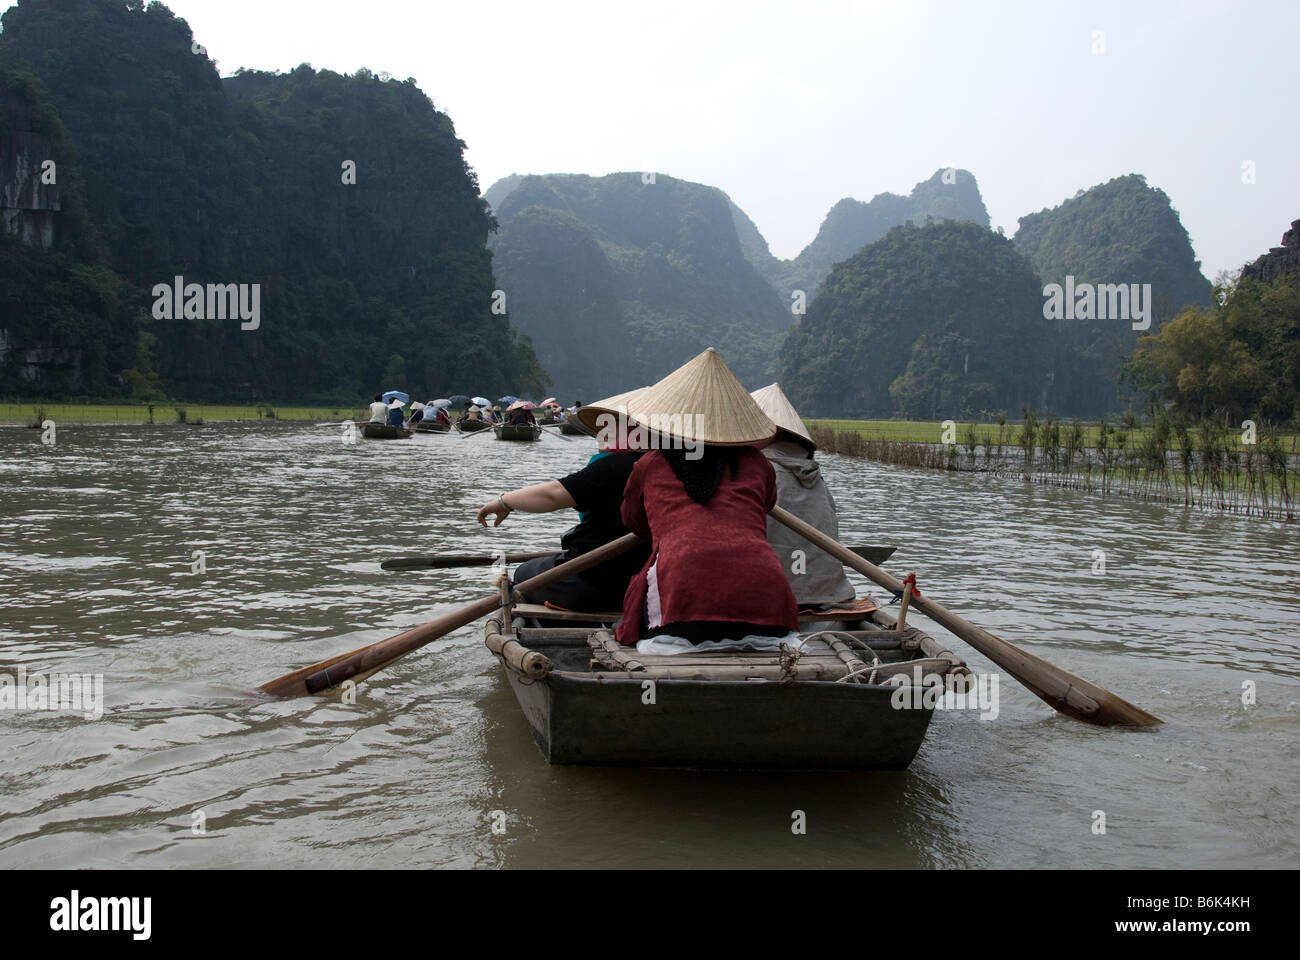 A boat ride on the Ngo Dong River, Tam Coc, north Vietnam Stock Photo